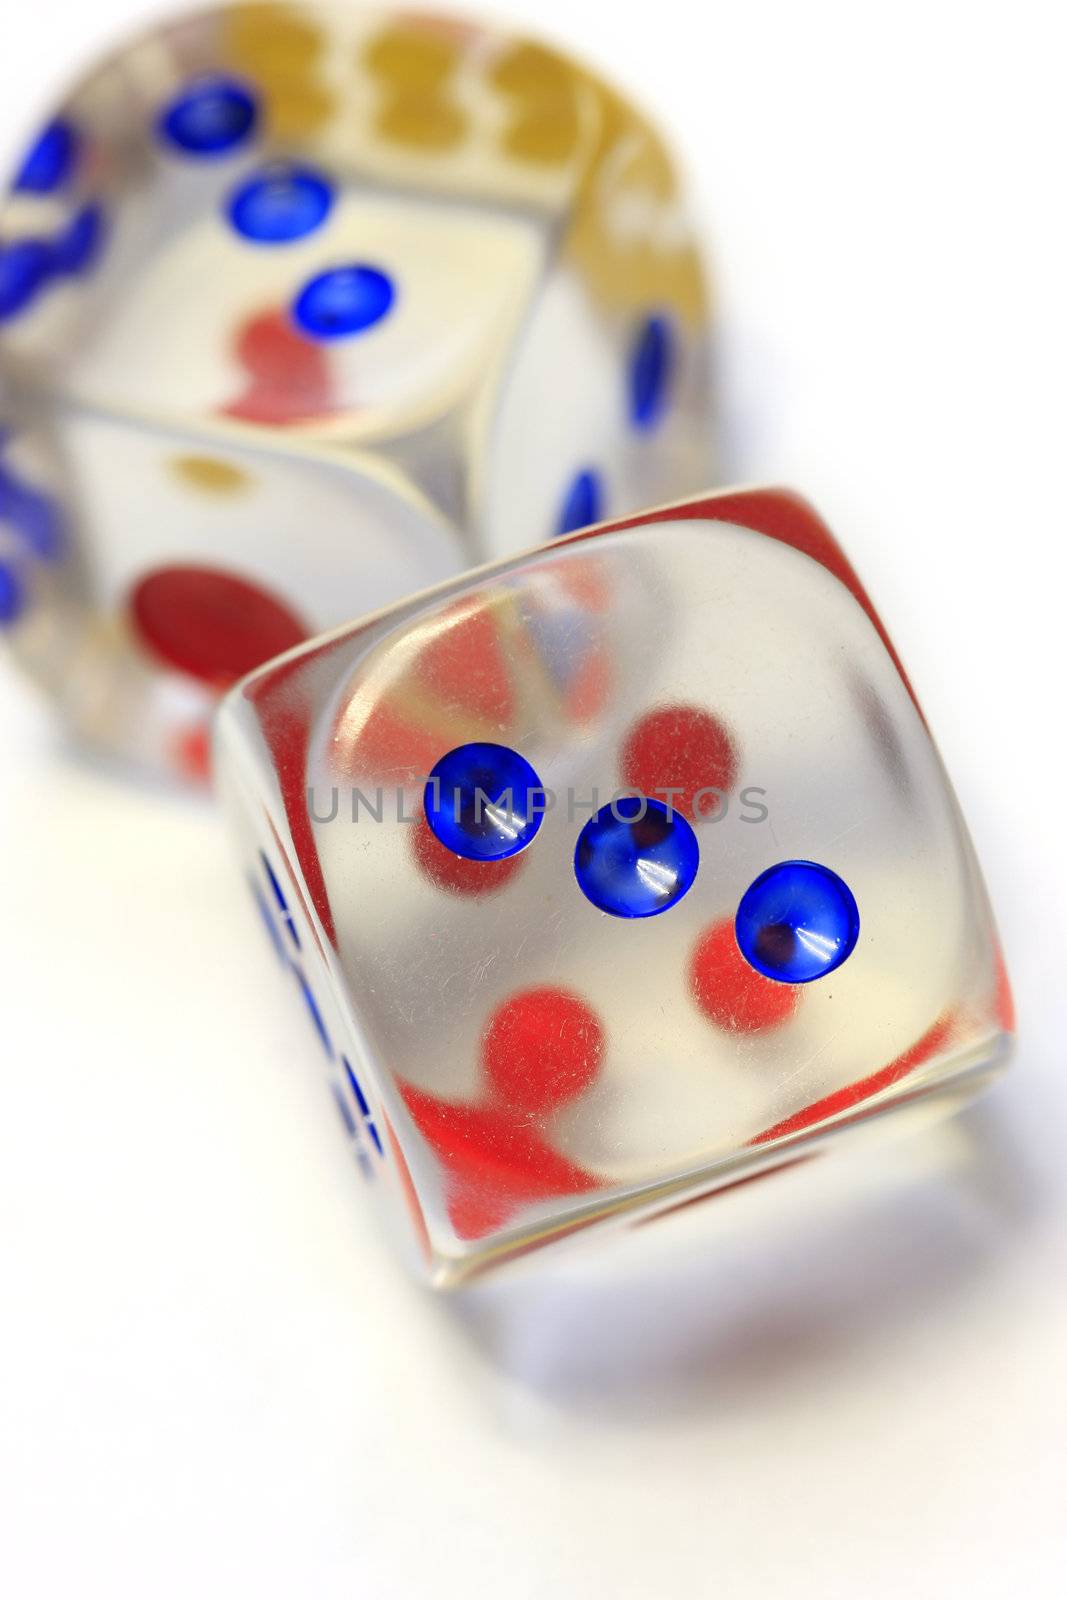 off balance, vertical shot of dice in white background